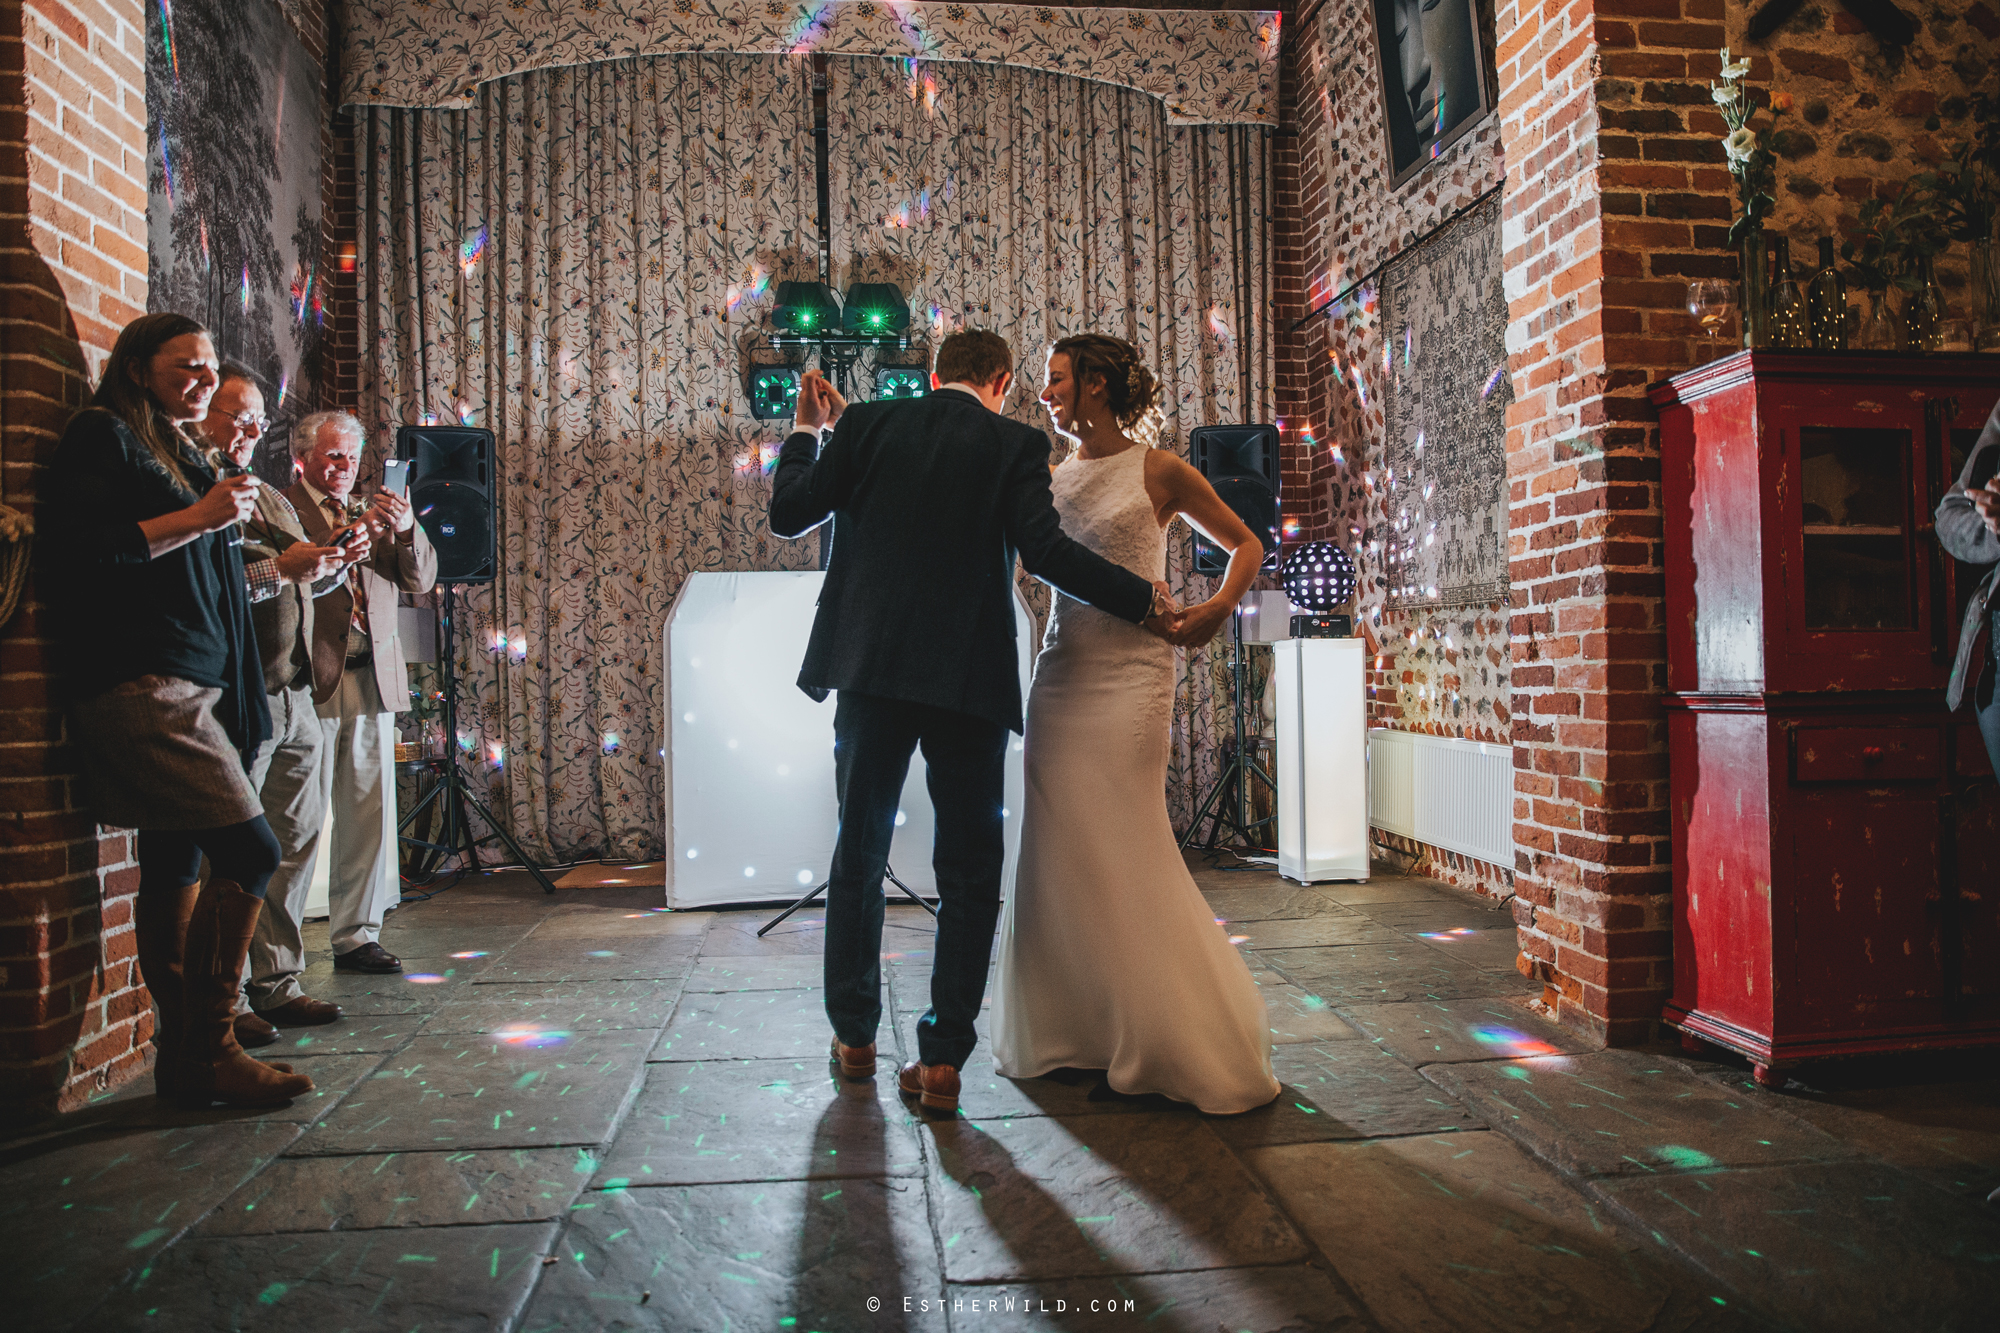 Wedding_Photographer_Chaucer_Barn_Holt_Norfolk_Country_Rustic_Venue_Copyright_Esther_Wild_IMG_2394.jpg